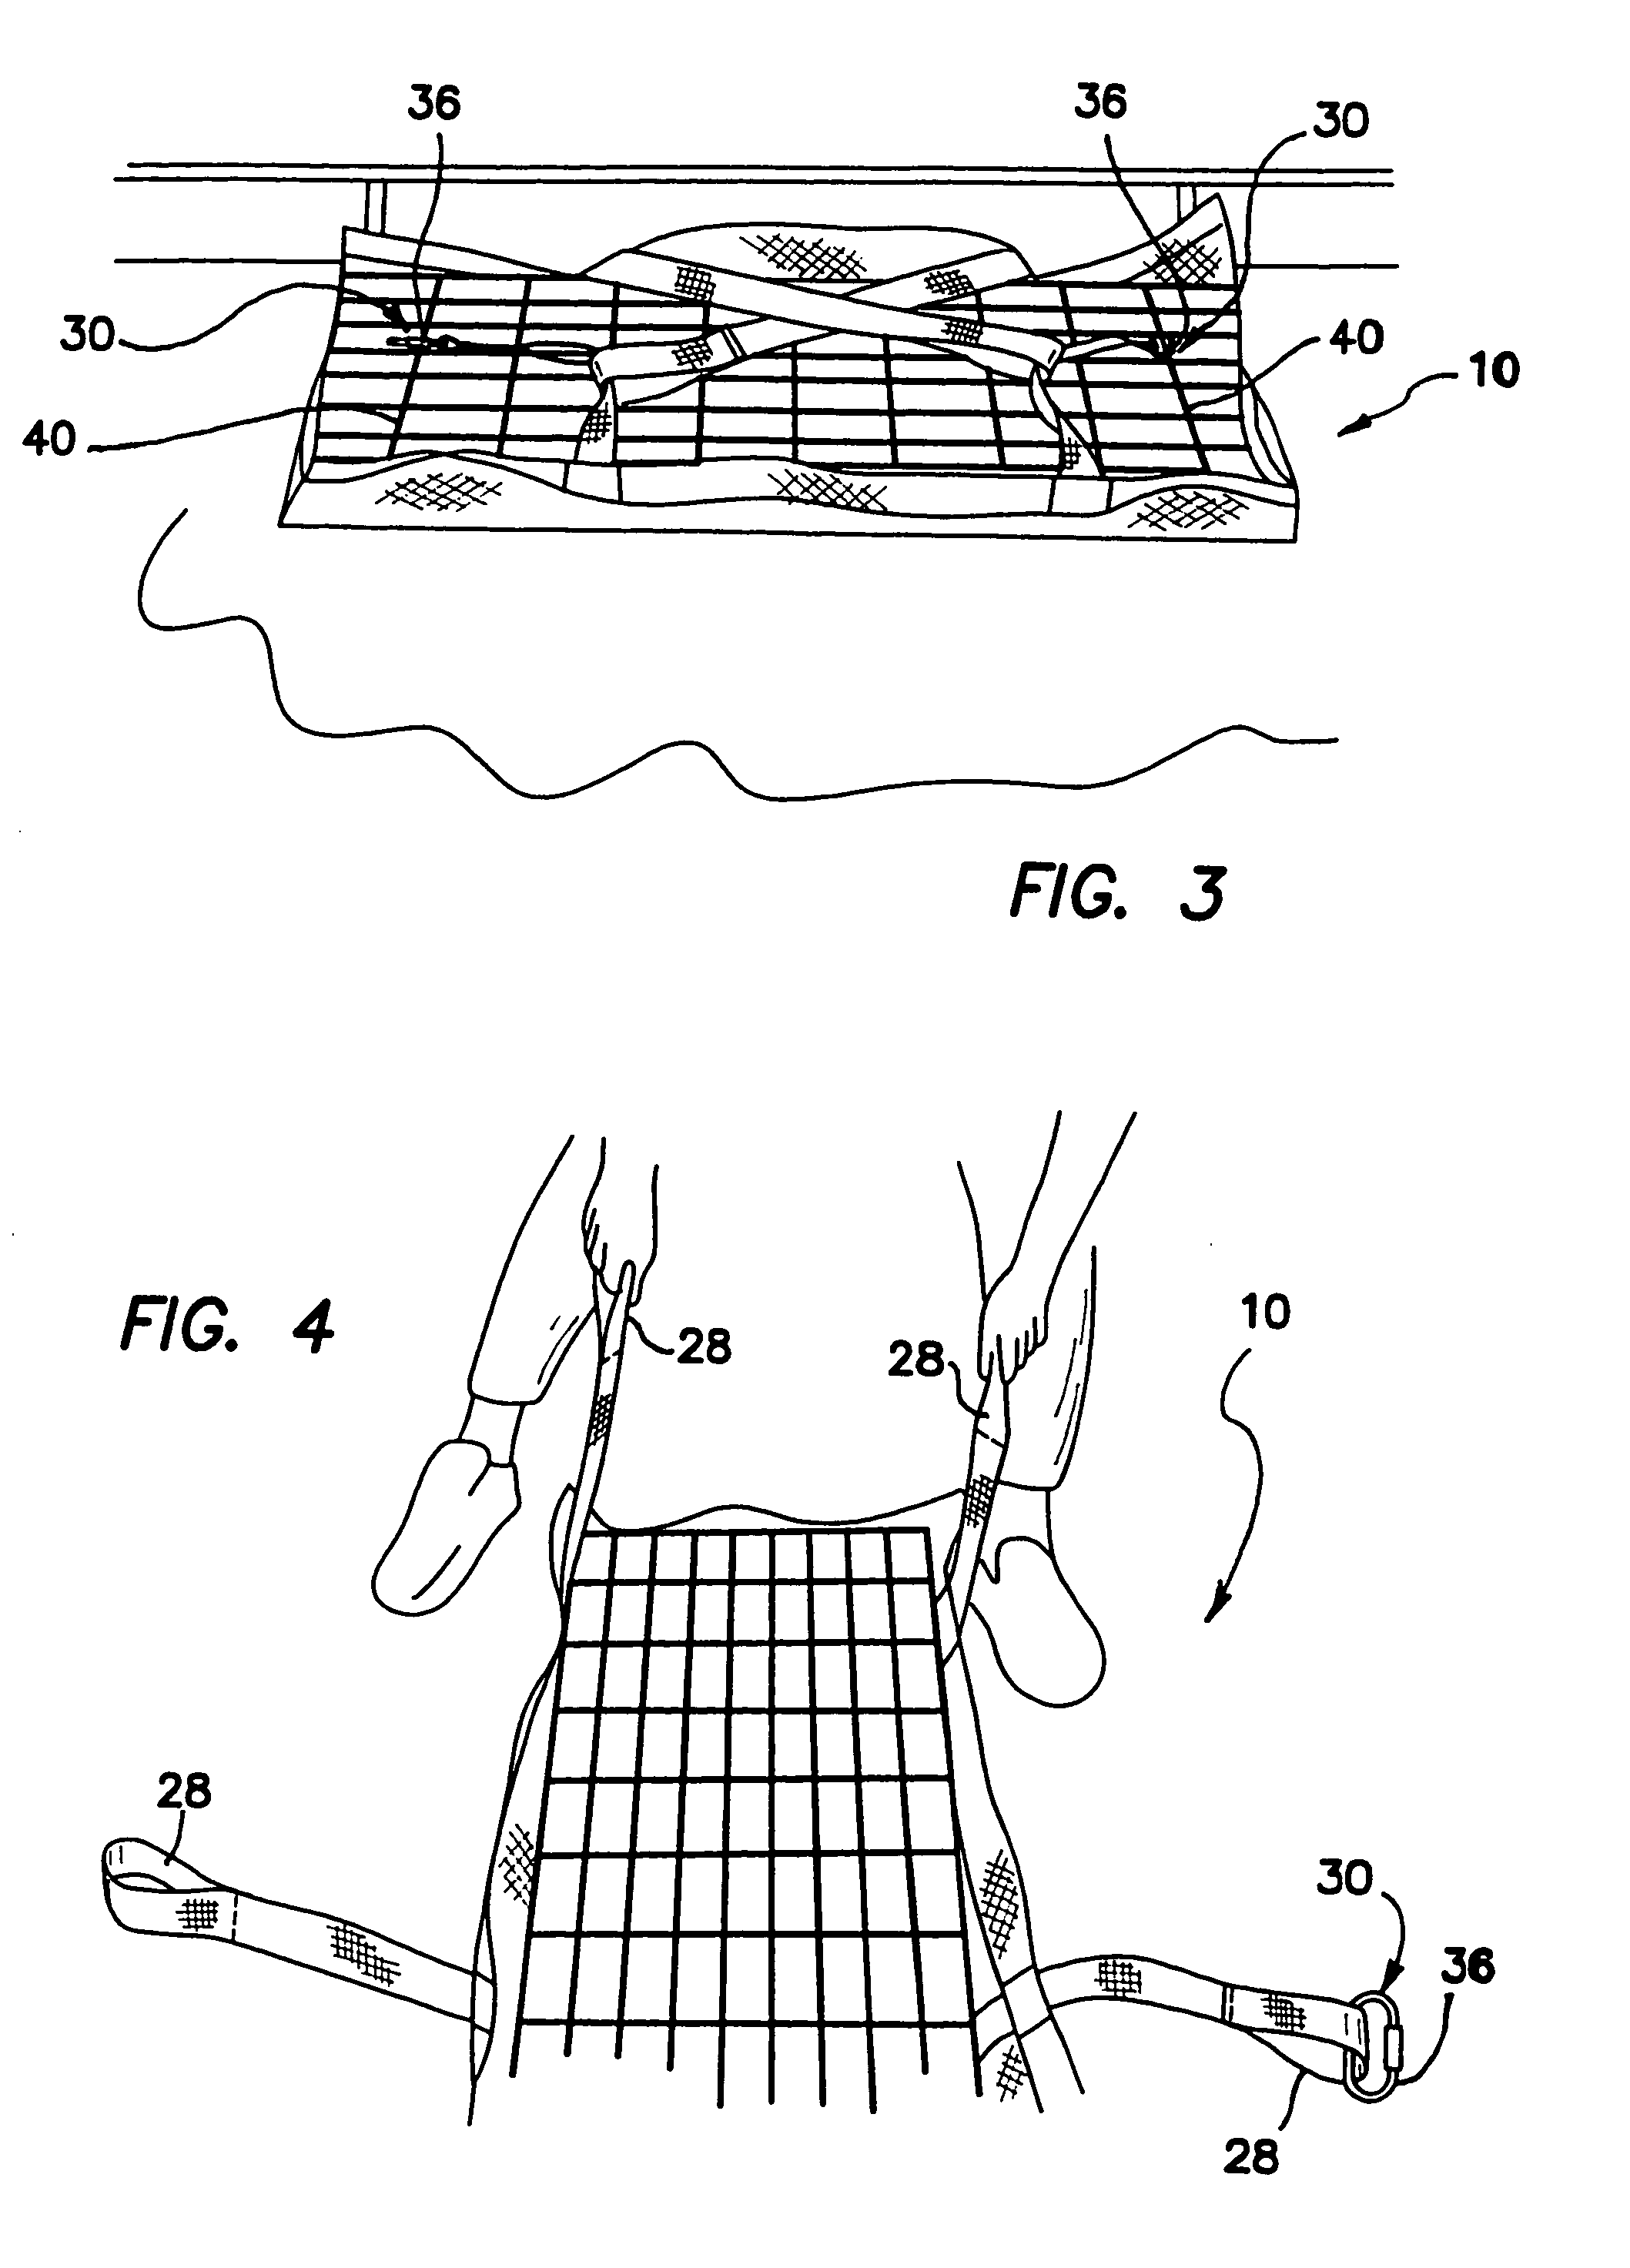 Storm drain filter device